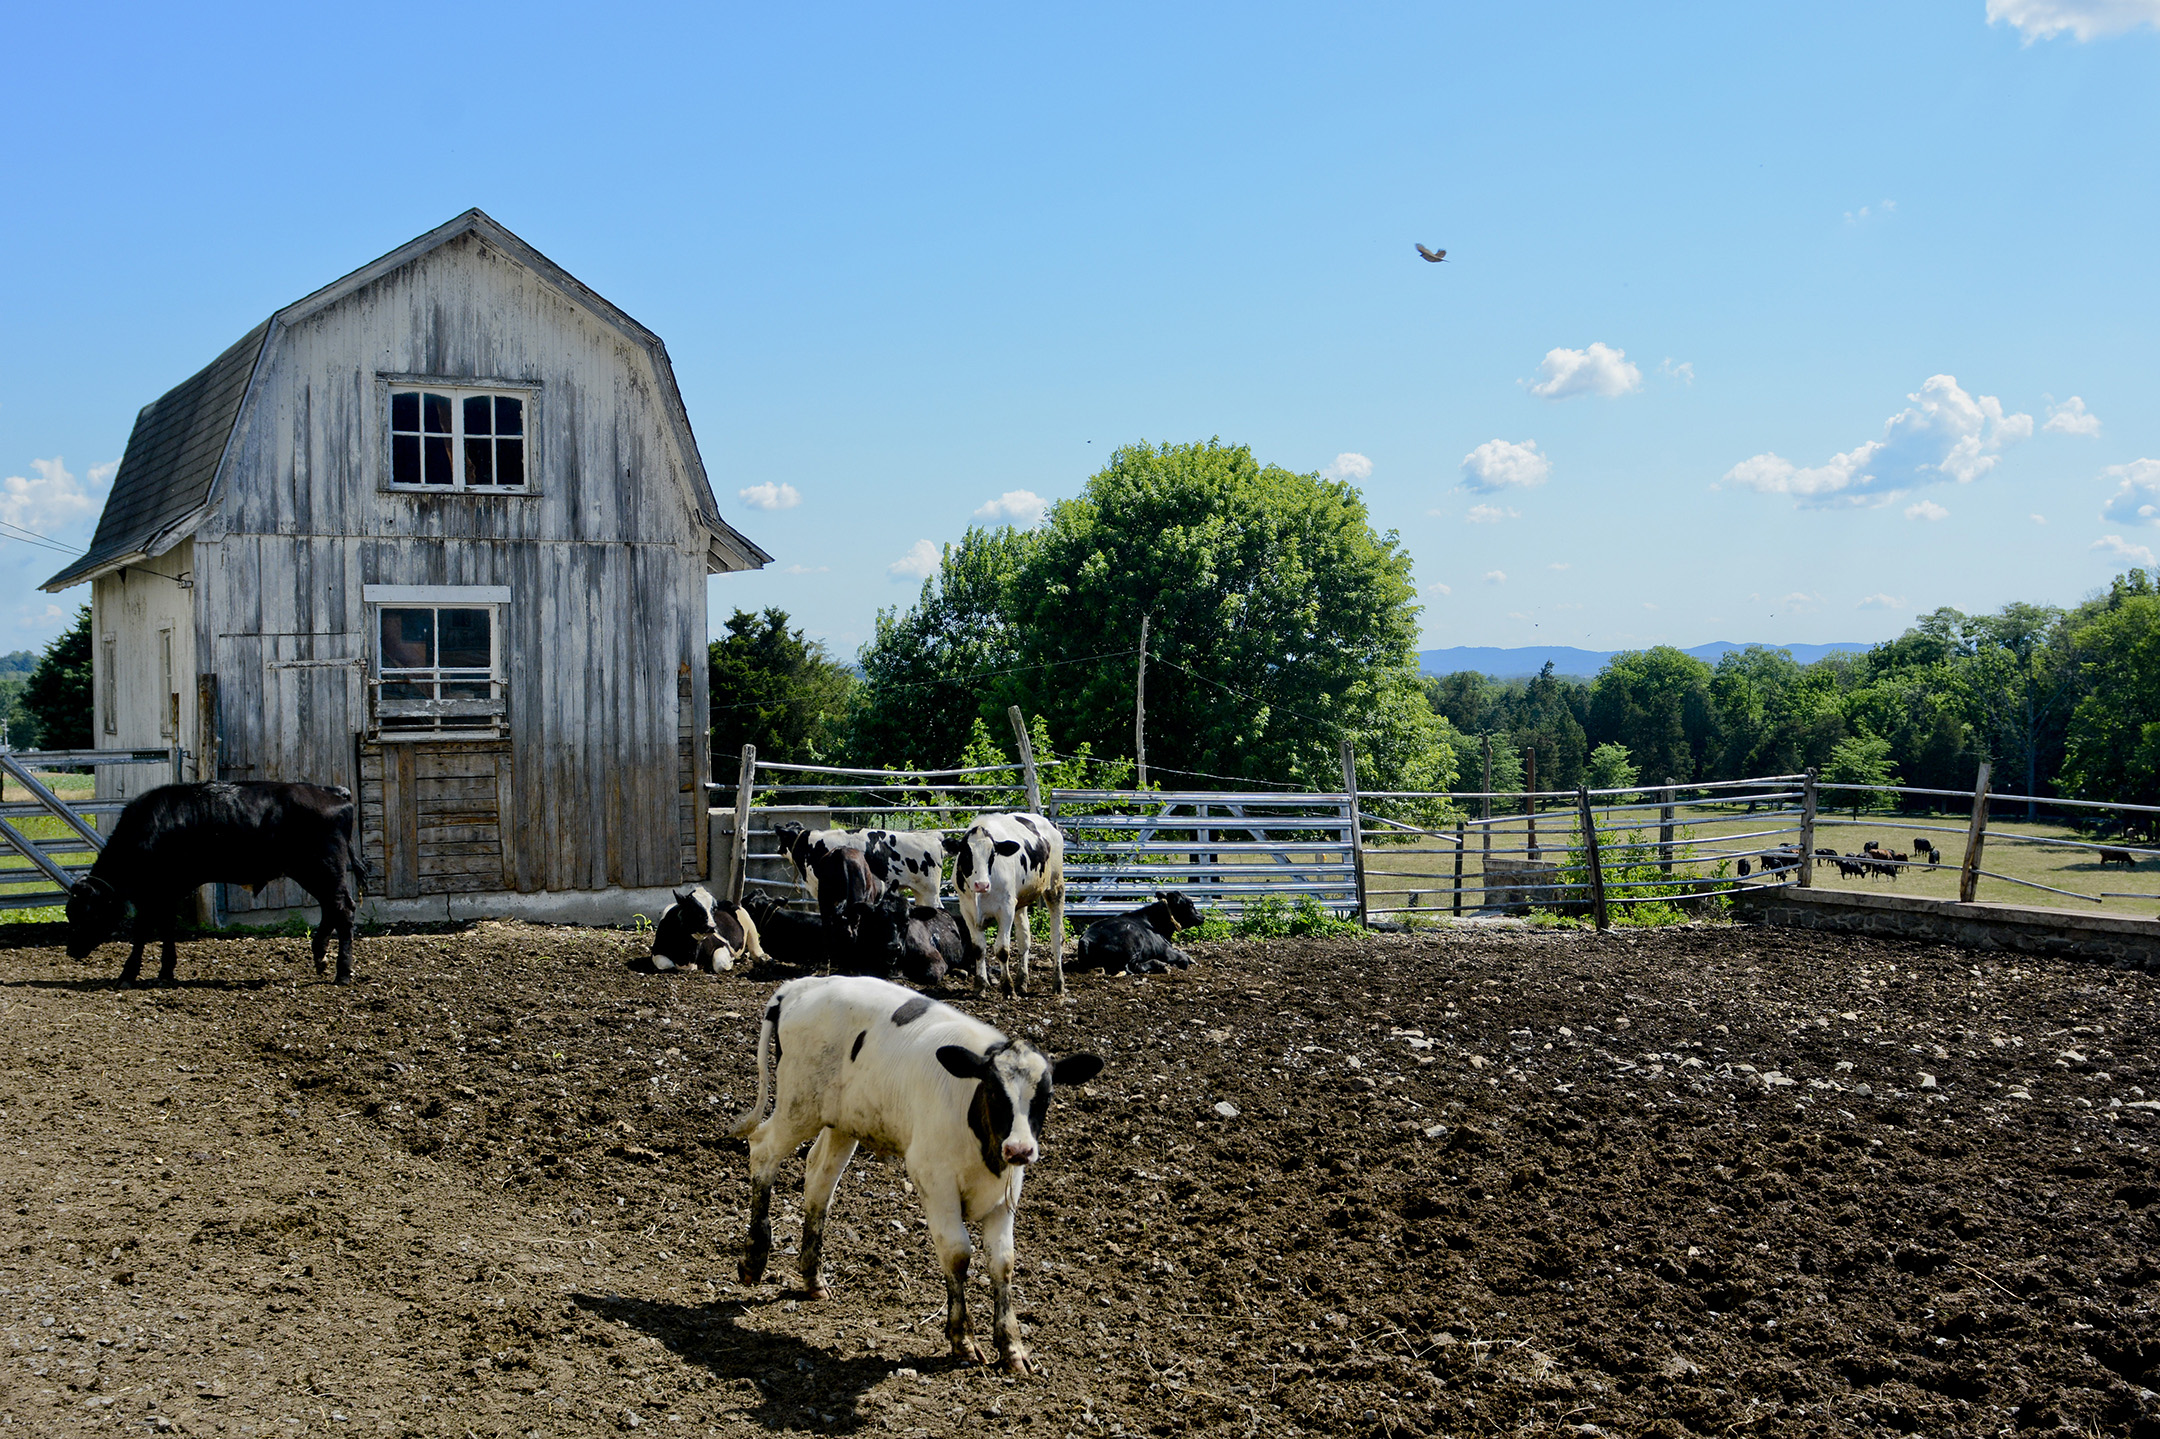  The farm, located 23 minutes west of Reading, raises cattle primarily for beef now. There are some dairy cows on the farm, but are milked at a different location. 